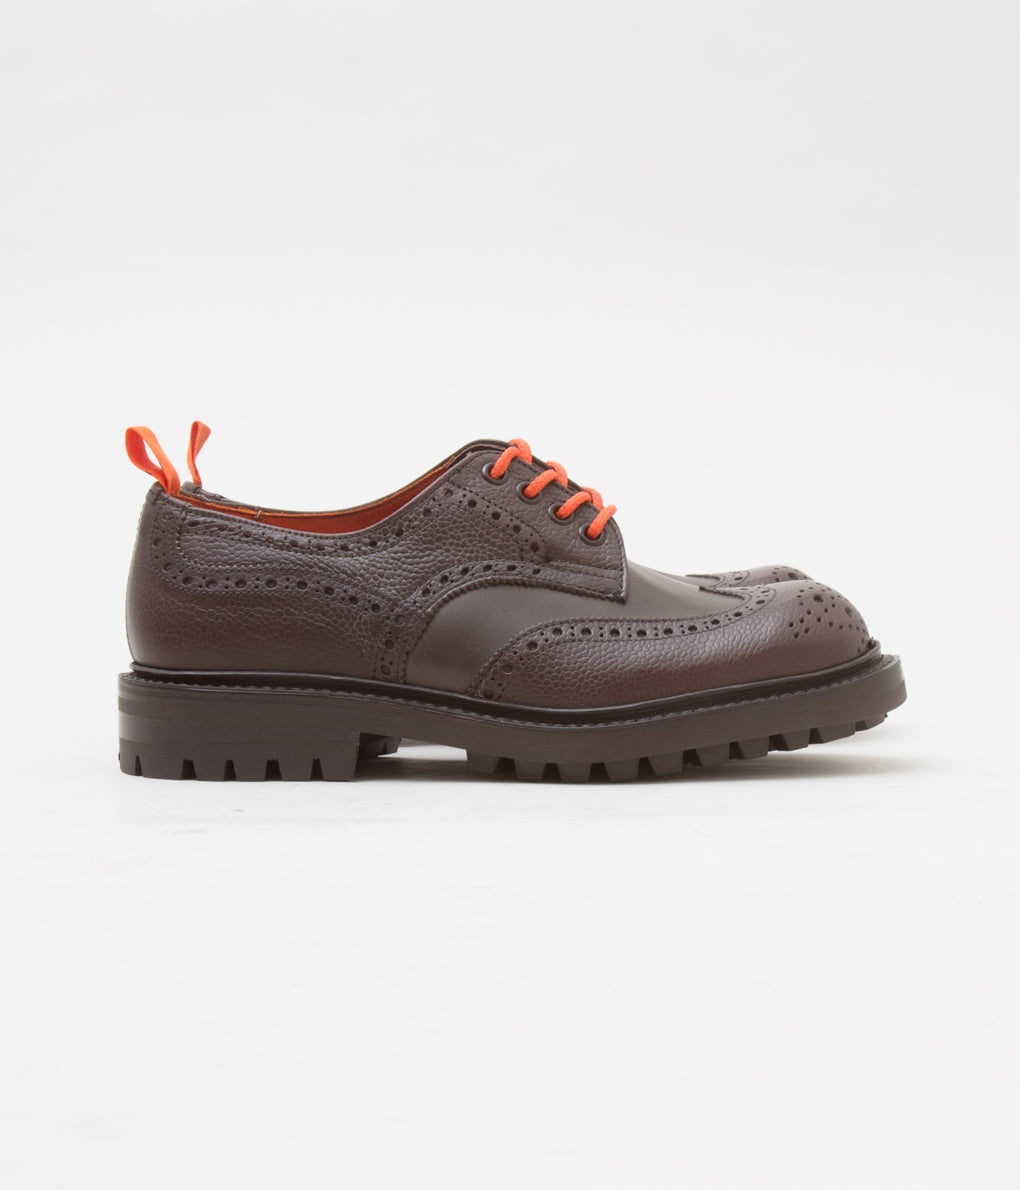 QUILP BY TRICKER'S×MAIDENS SHOP "M7457 OXFORD SHOE" (DK BROWN MULTI)